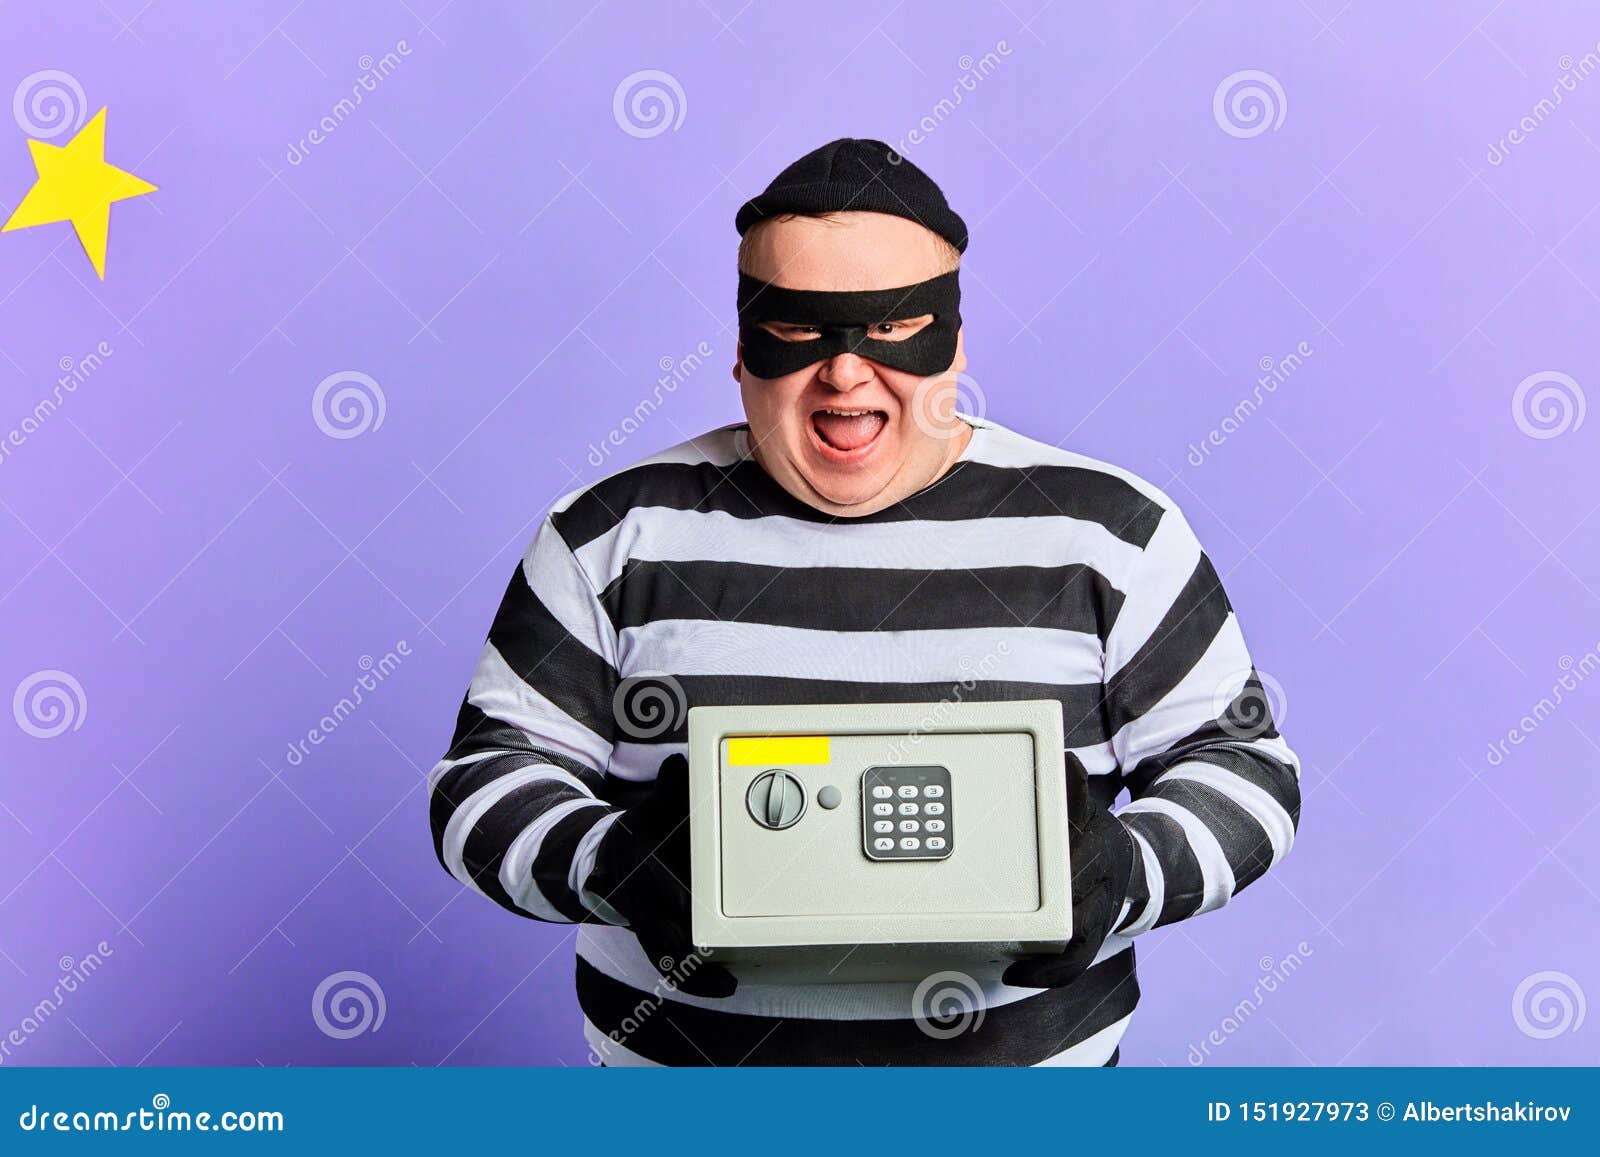 Happy Cheerful Excited Burglar In Mask And Striped Clothes Holding Safety Box Stock Image